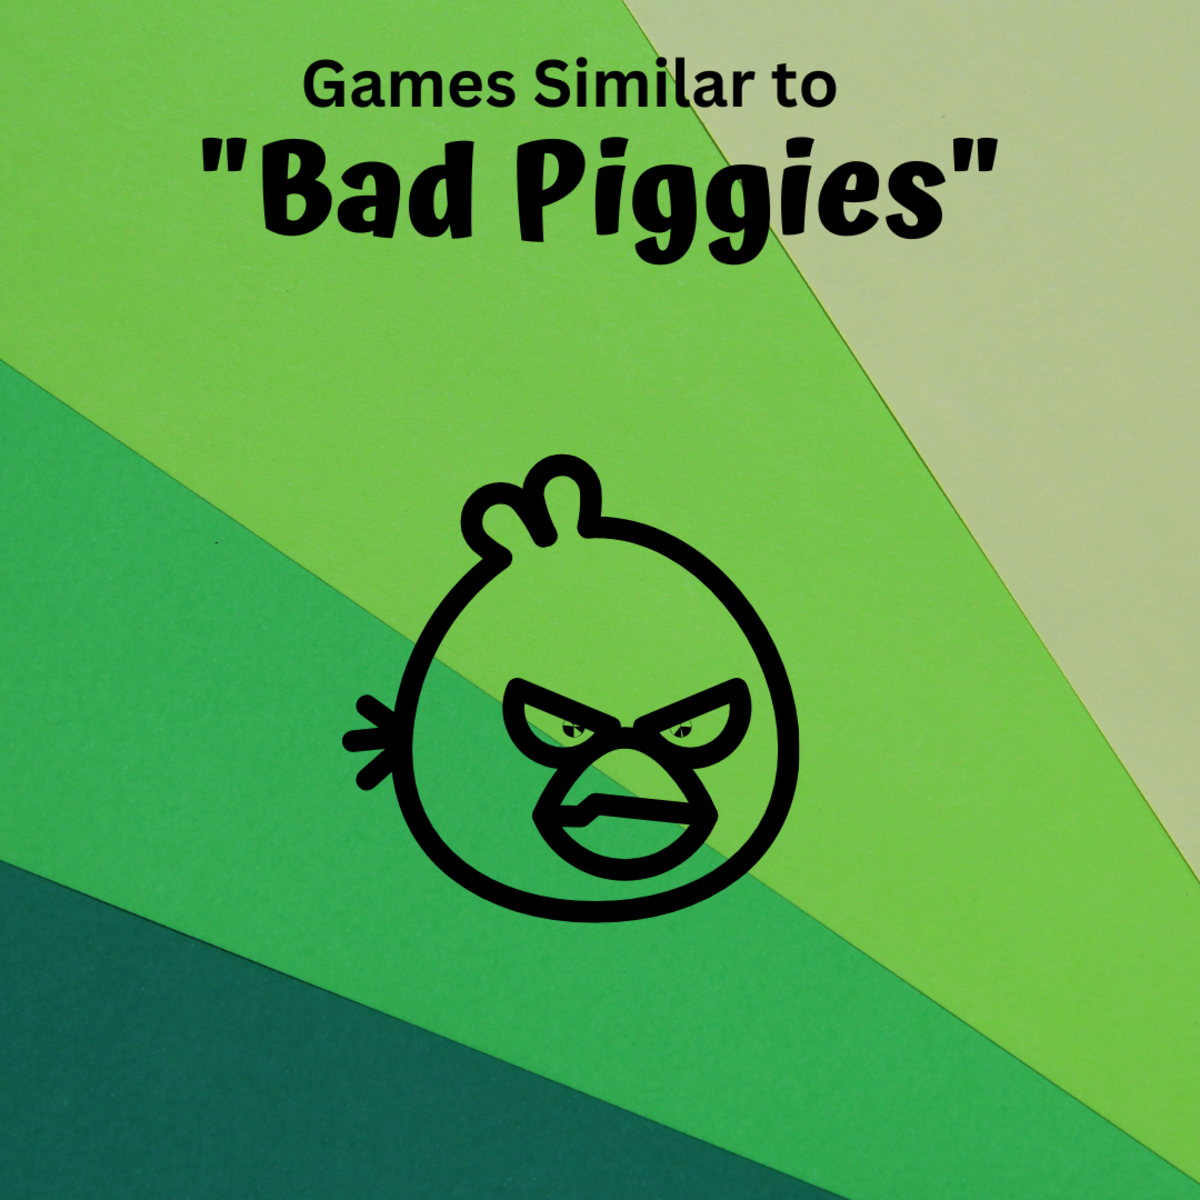 Which games have similar gameplay mechanics to "Bag Piggies"?